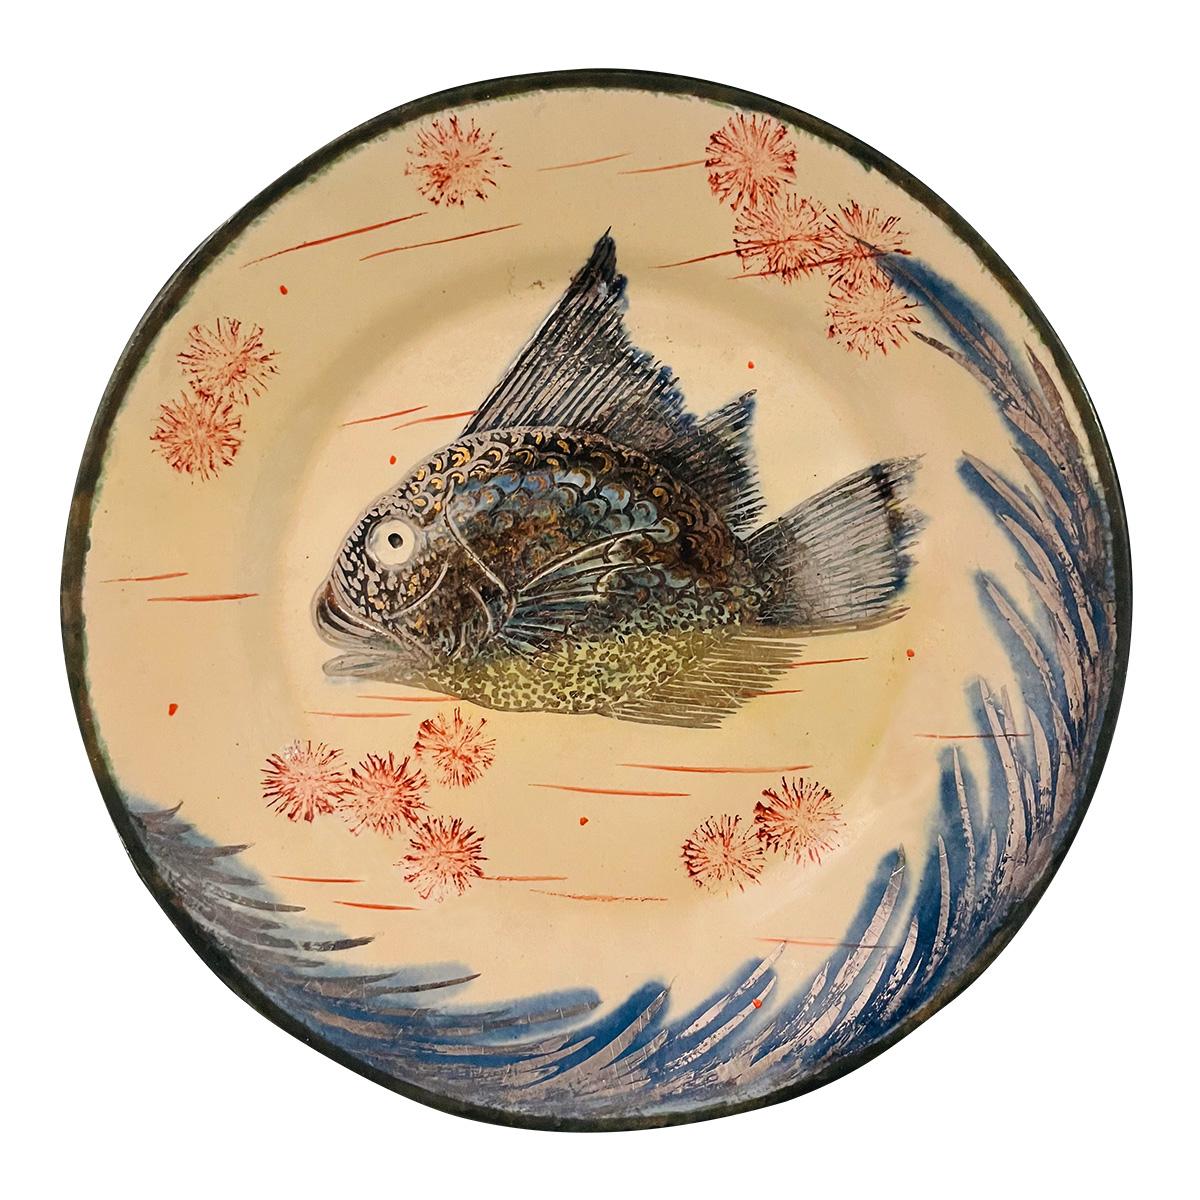 Set of 4 dinner plates, colored drawings with gold and silver highlights, enameled decoration of fish and seabed, green back. 
Set composed as follows:
- 1 plate with a blue, brown and green fish, blue seaweed
- 1 plate with an octopus, blue